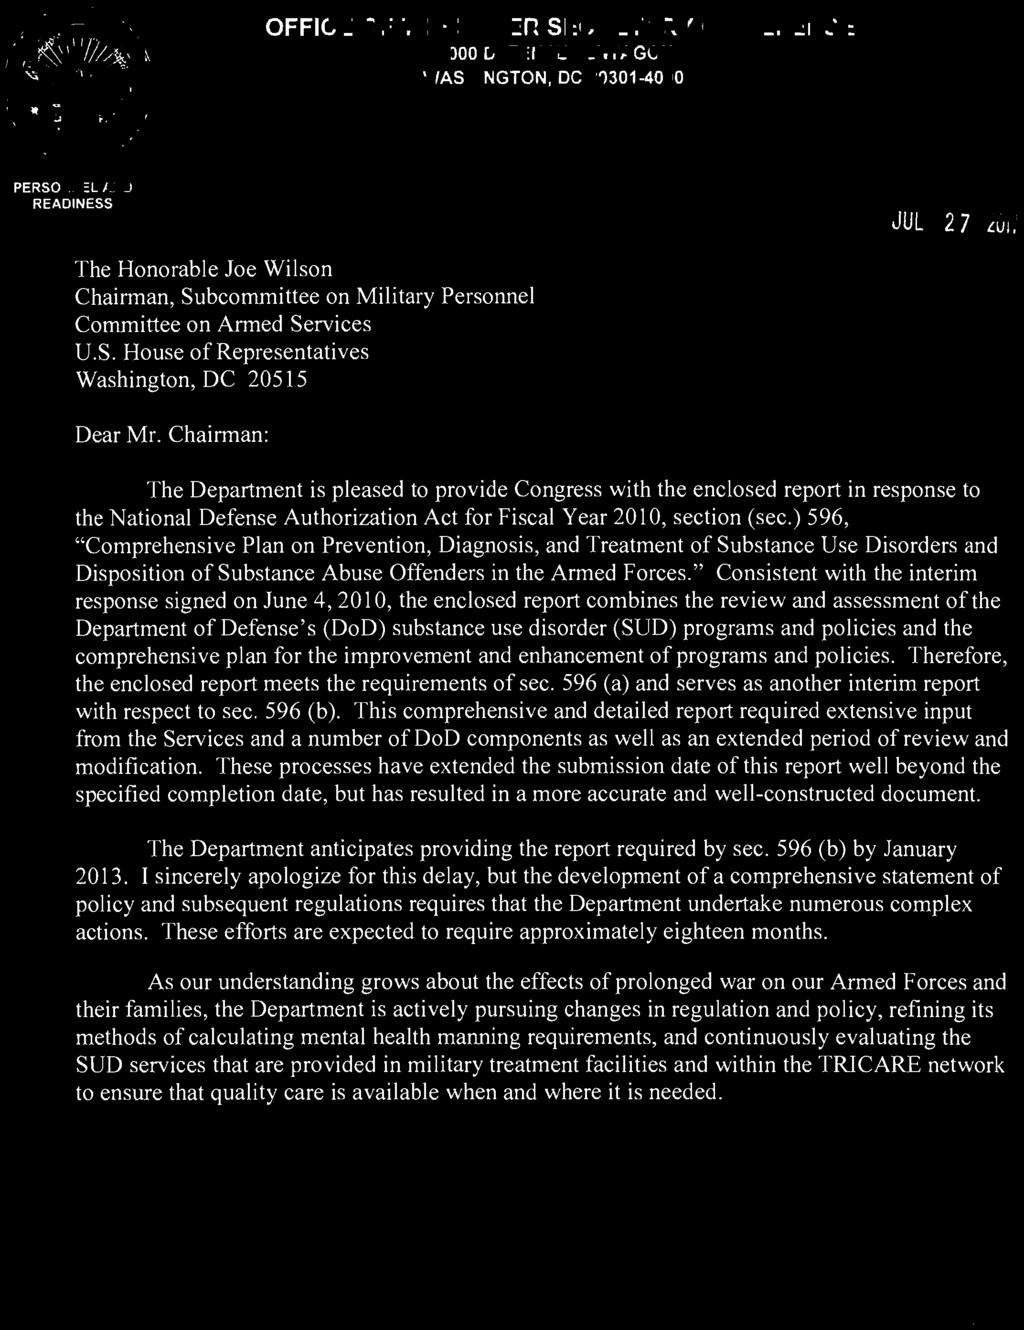 Chairman: The Department is pleased to provide Congress with the enclosed report in response to the National Defense Authorization Act for Fiscal Year 2010, section (sec.